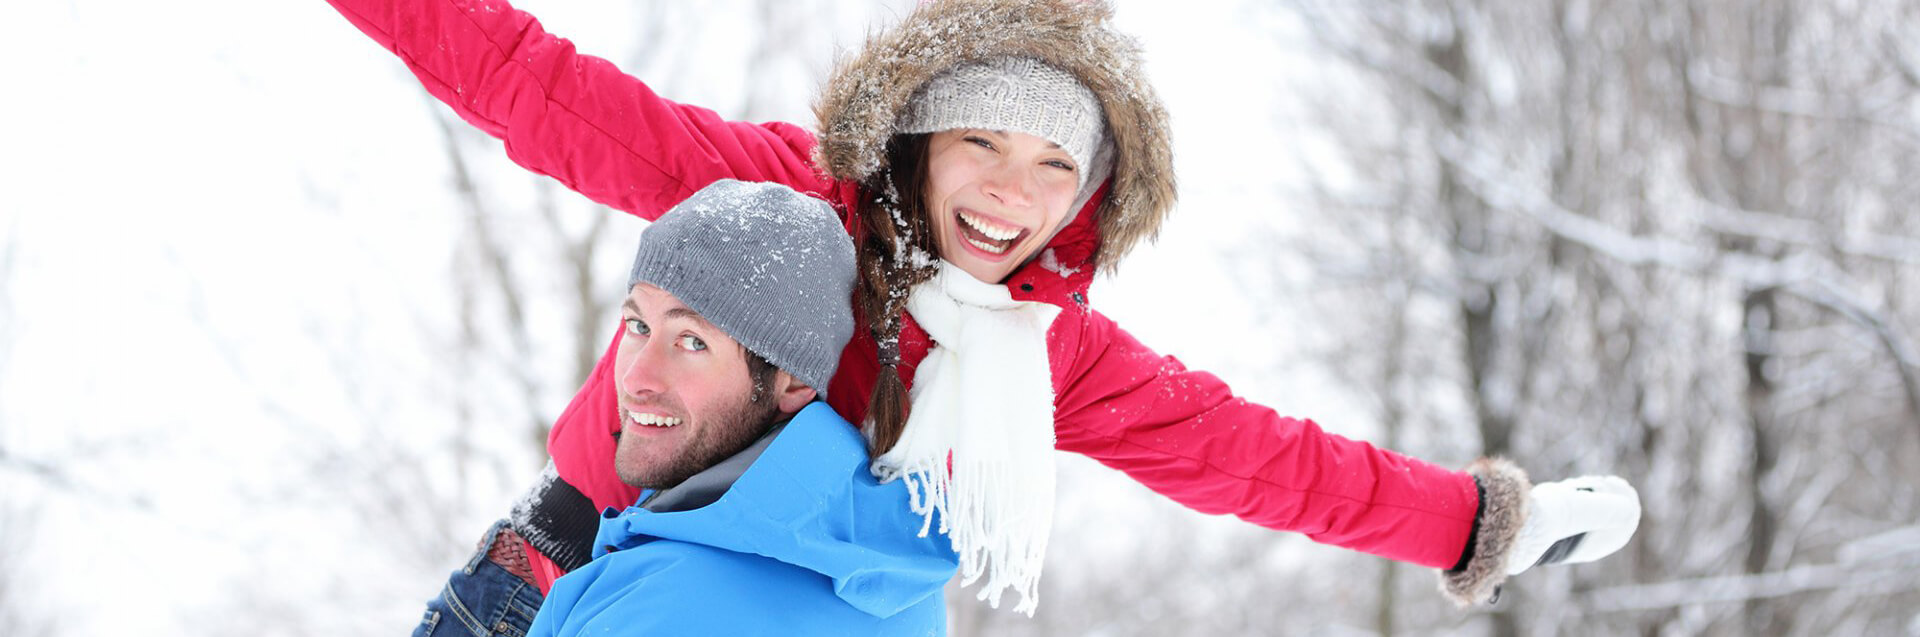 Man carrying smiling woman wearing snow clothes with snowy mountain scene in background.